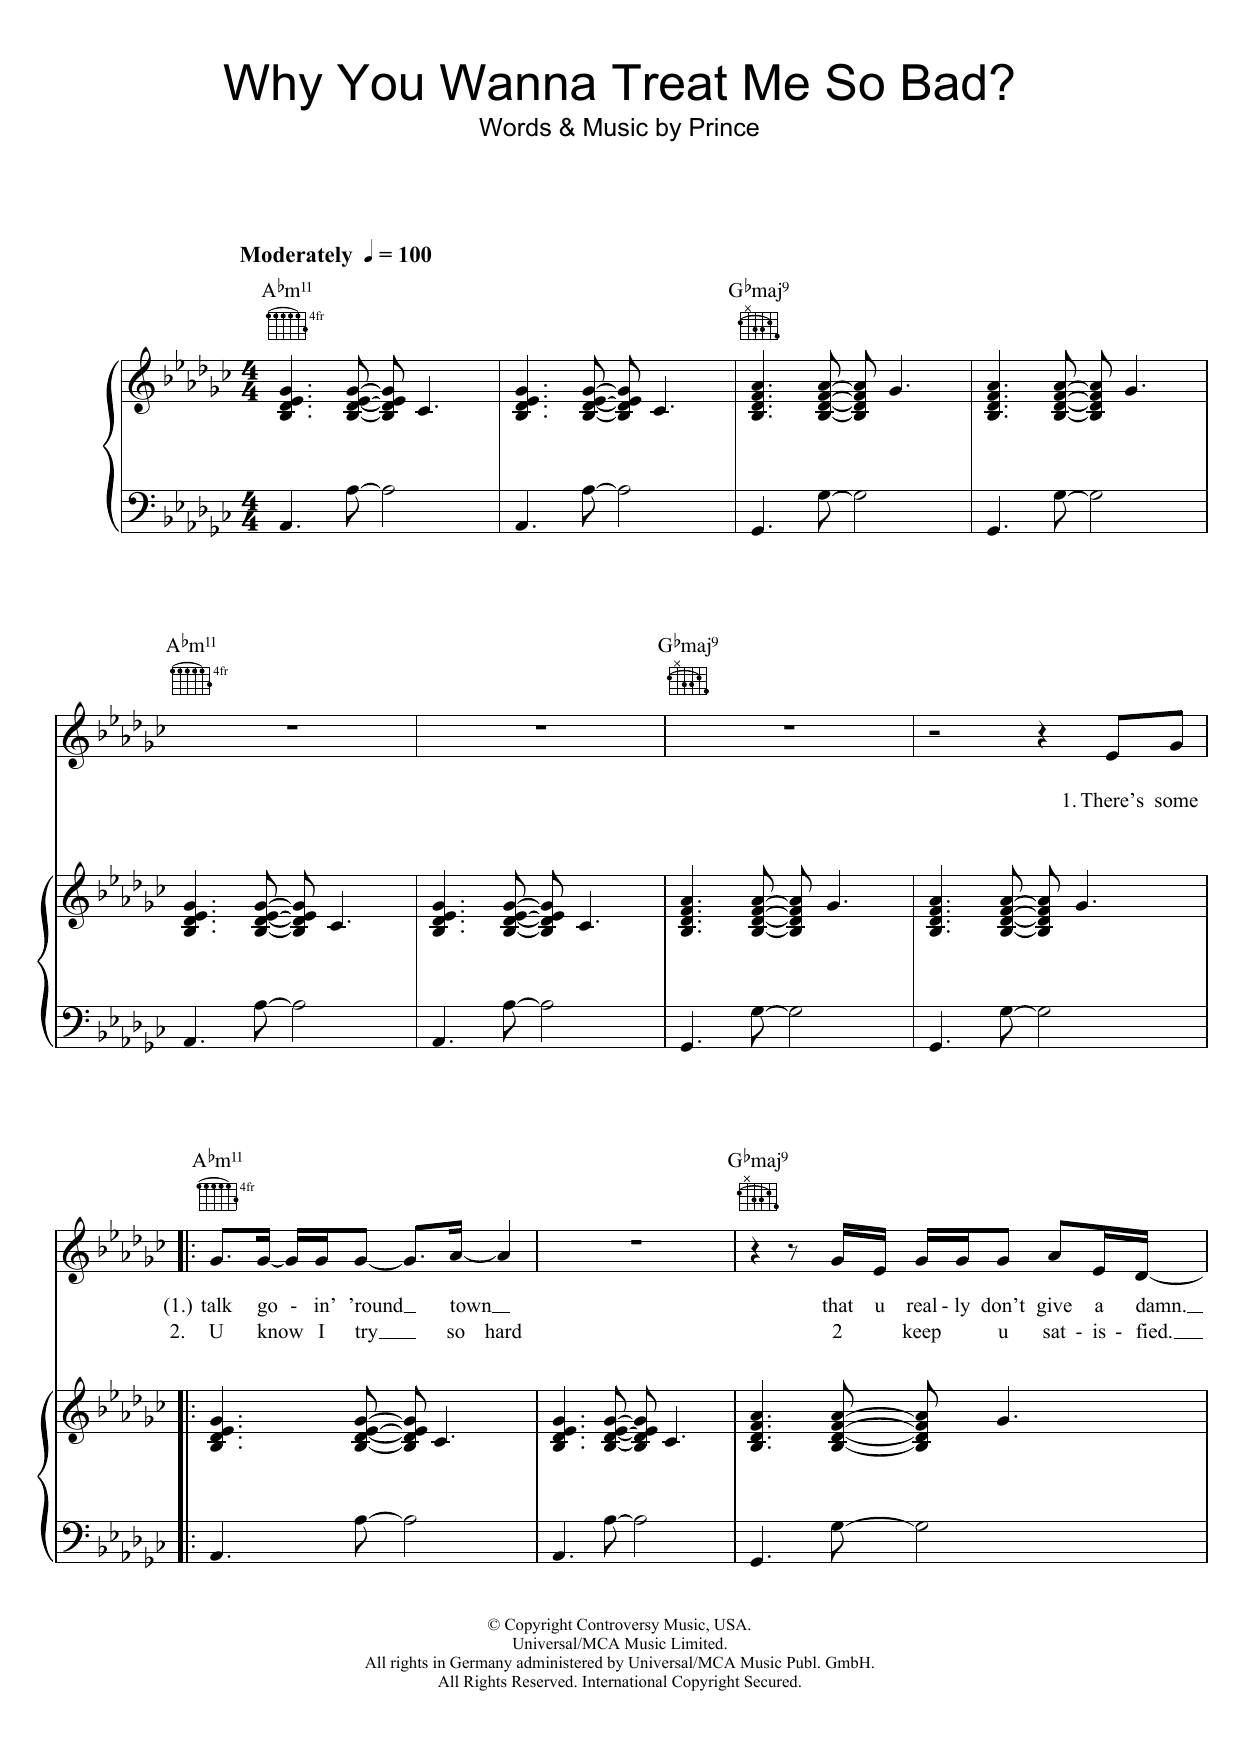 Download Prince Why You Wanna Treat Me So Bad? Sheet Music